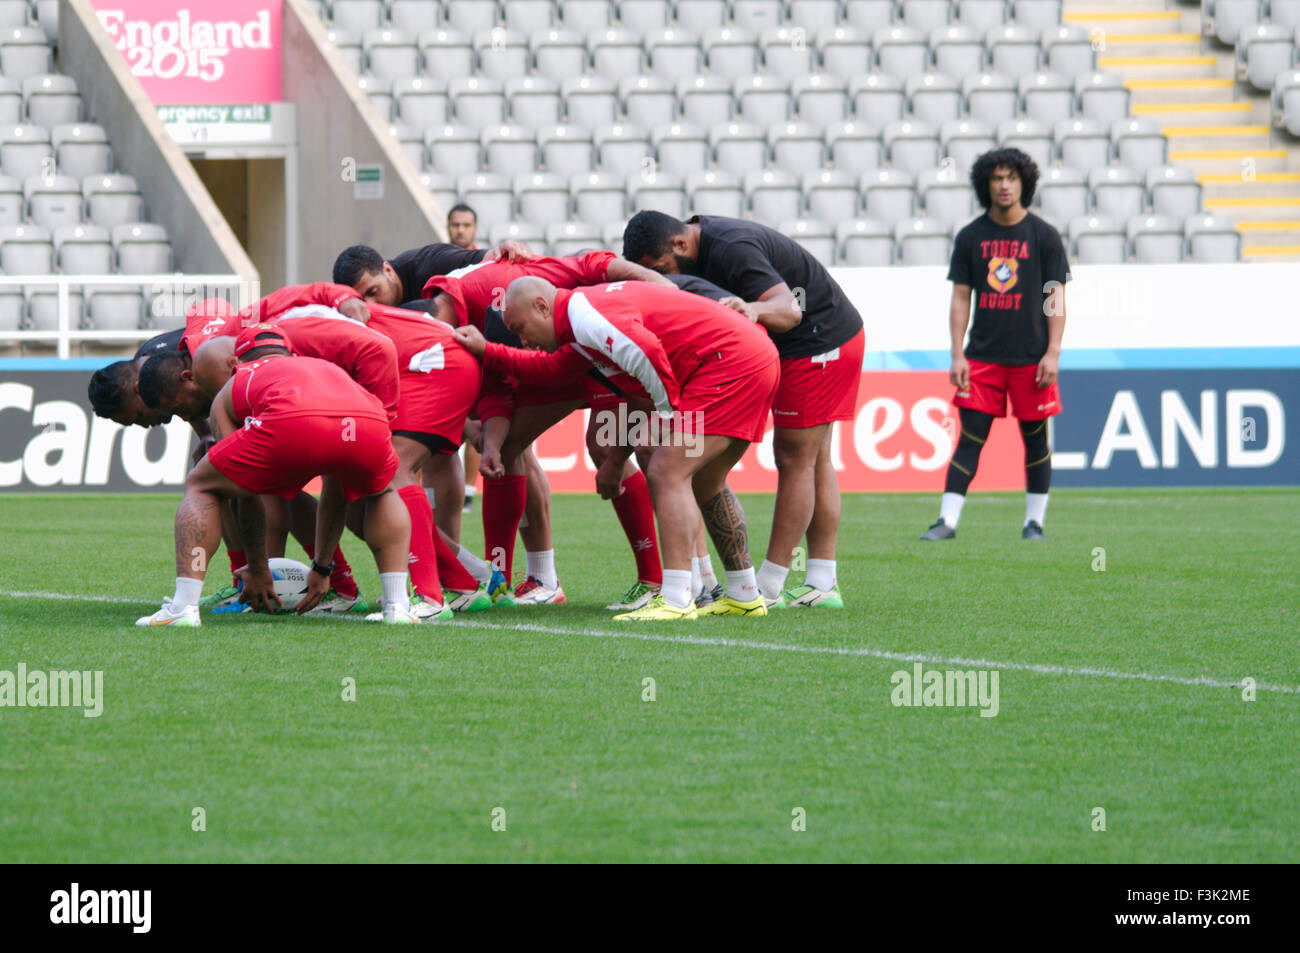 Newcastle upon Tyne, UK, 8 October 2015, The Tongan rugby squad practicing during Captain’s run at St James Park prior to their match against New Zealand in the Rugby World Cup 2015, Credit: Colin Edwards/Alamy Live News Stock Photo